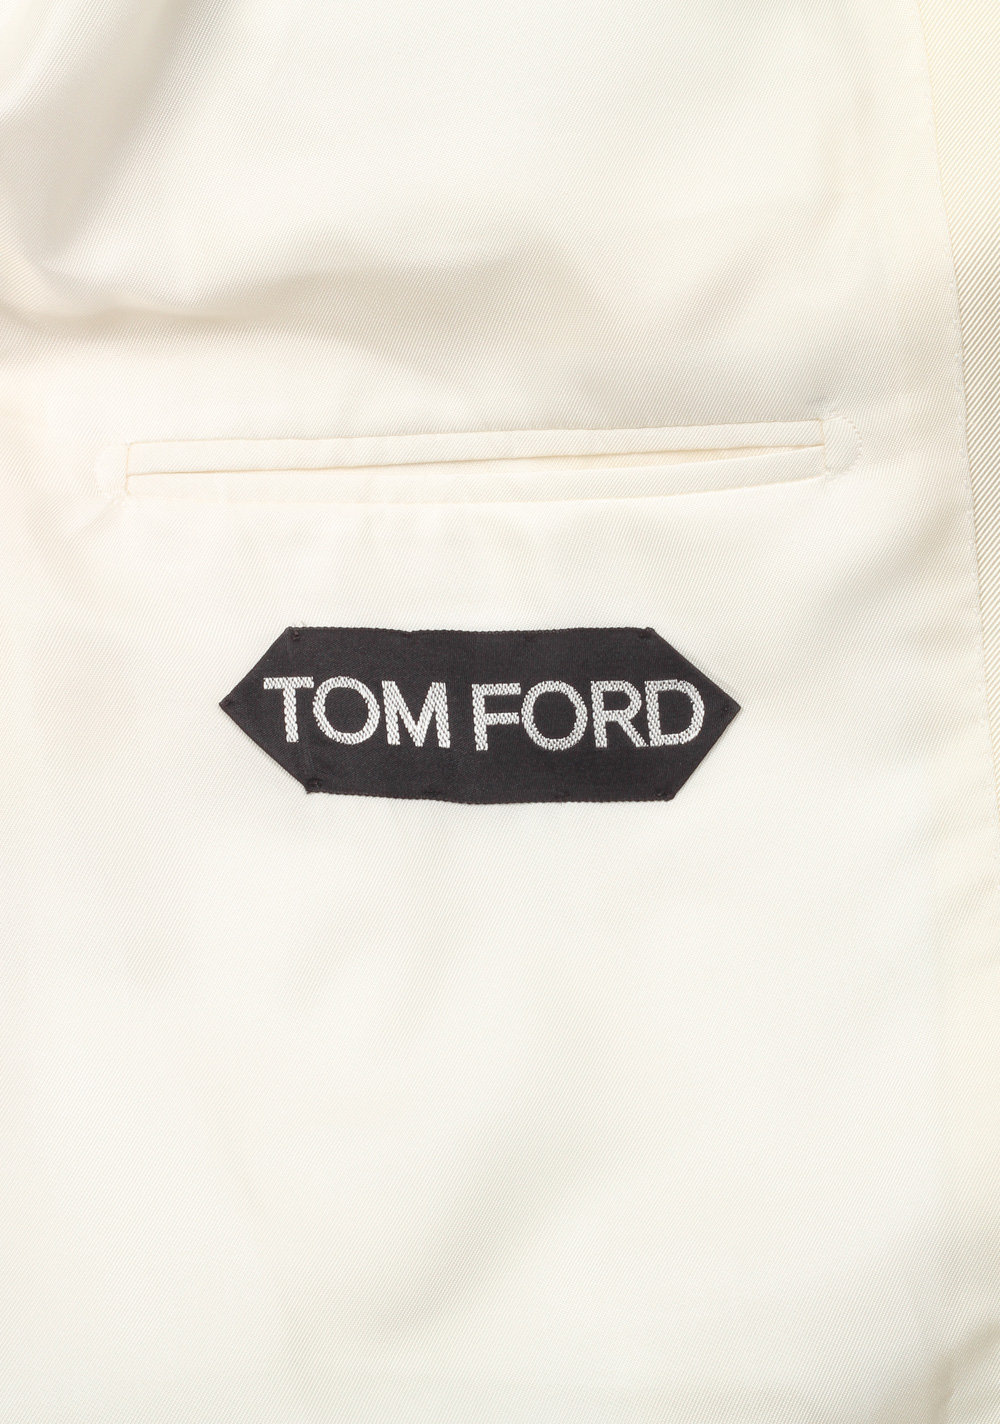 TOM FORD O’Connor Shawl Collar Ivory Sport Coat Tuxedo Dinner Jacket Size 54 / 44R U.S. Fit Y | Costume Limité